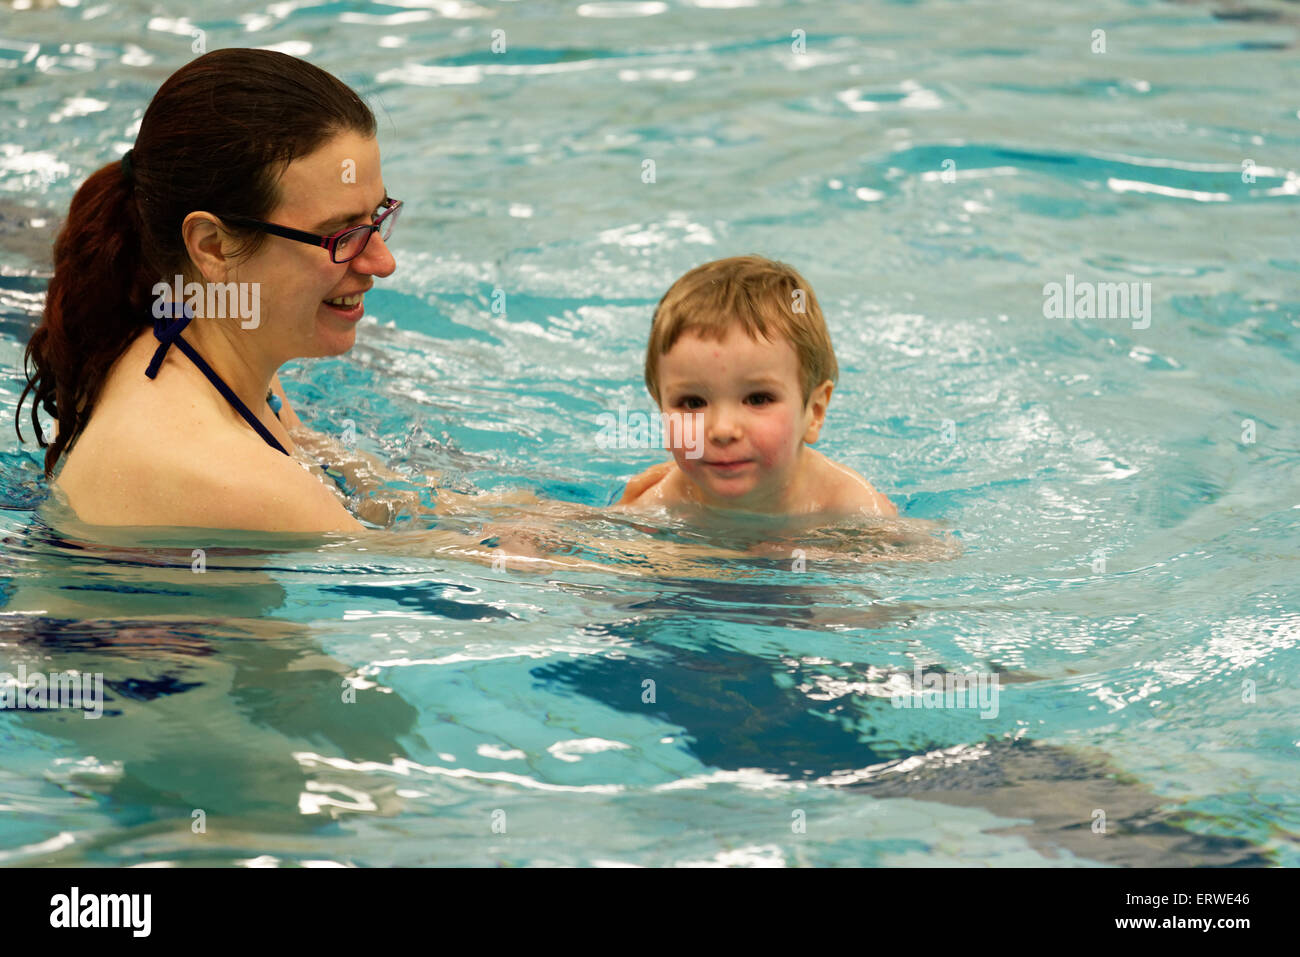 A young boy (two and a half years old) learning to swim Stock Photo